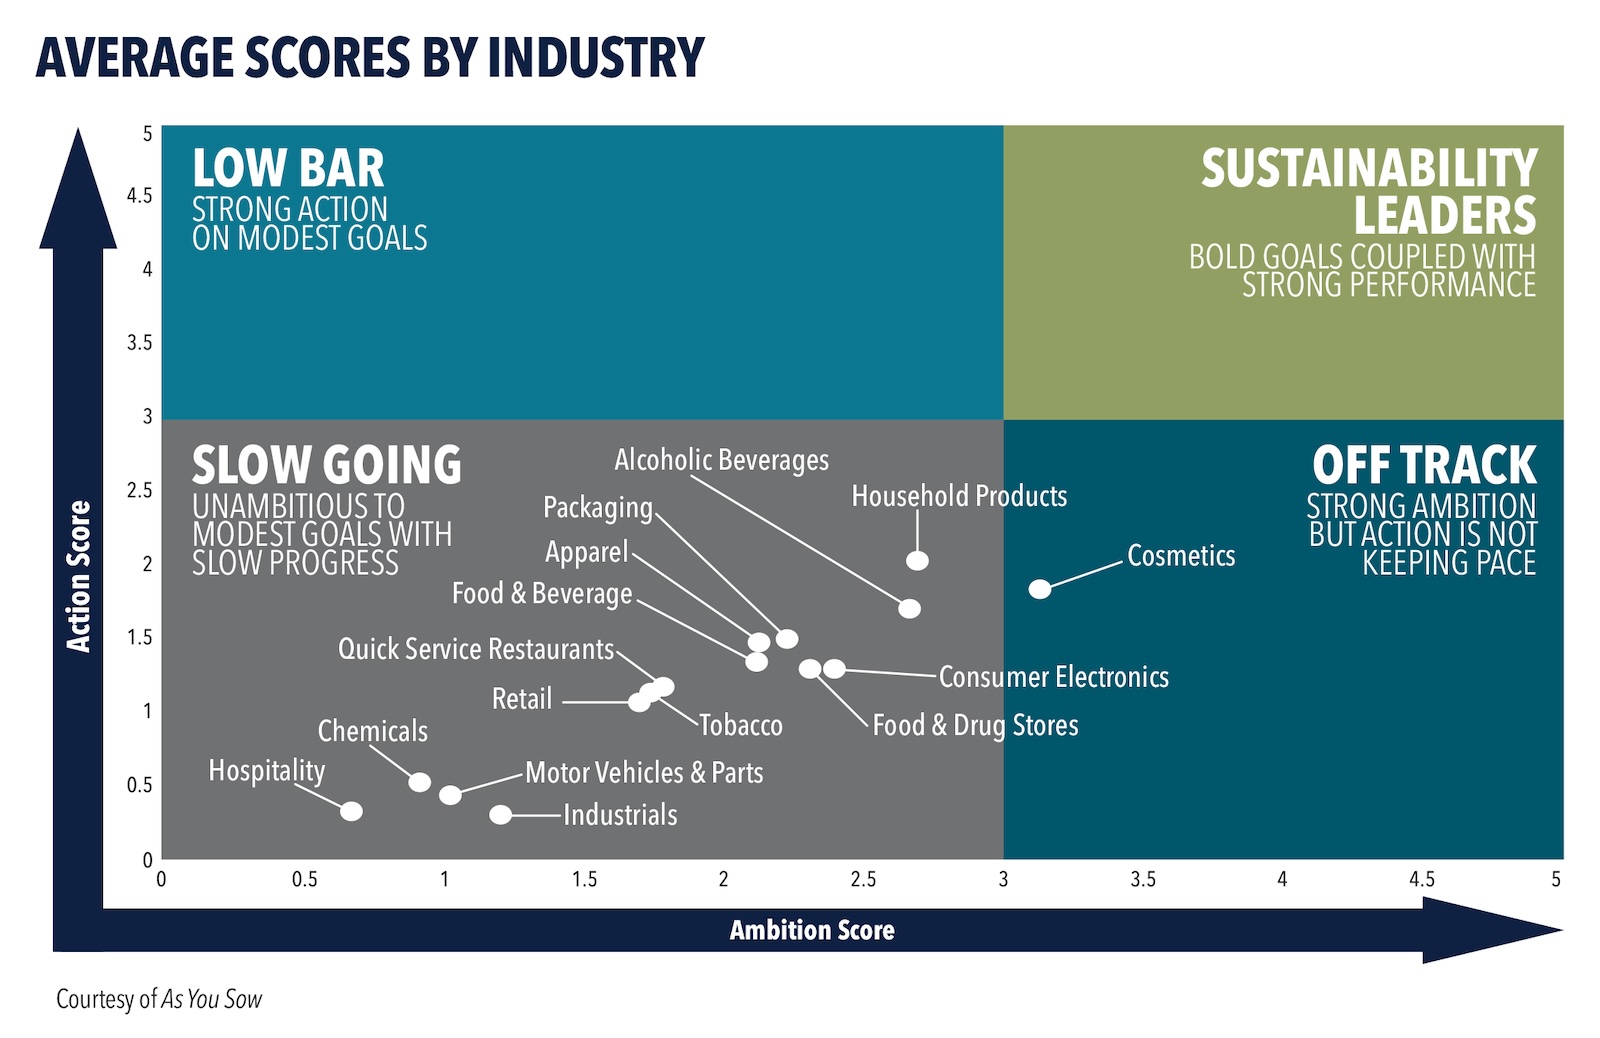 A graph shows how industries scored on "action" (y-axis) and "ambition" (x-axis). Industries with the least action and ambition are on the bottom left-hand side. All but one industry, cosmetics, is in this quadrant and marked as "slow going," with "unambitious to modest goals with slow progress." Cosmetics is shown as having higher ambition but action that is "not keeping pace."